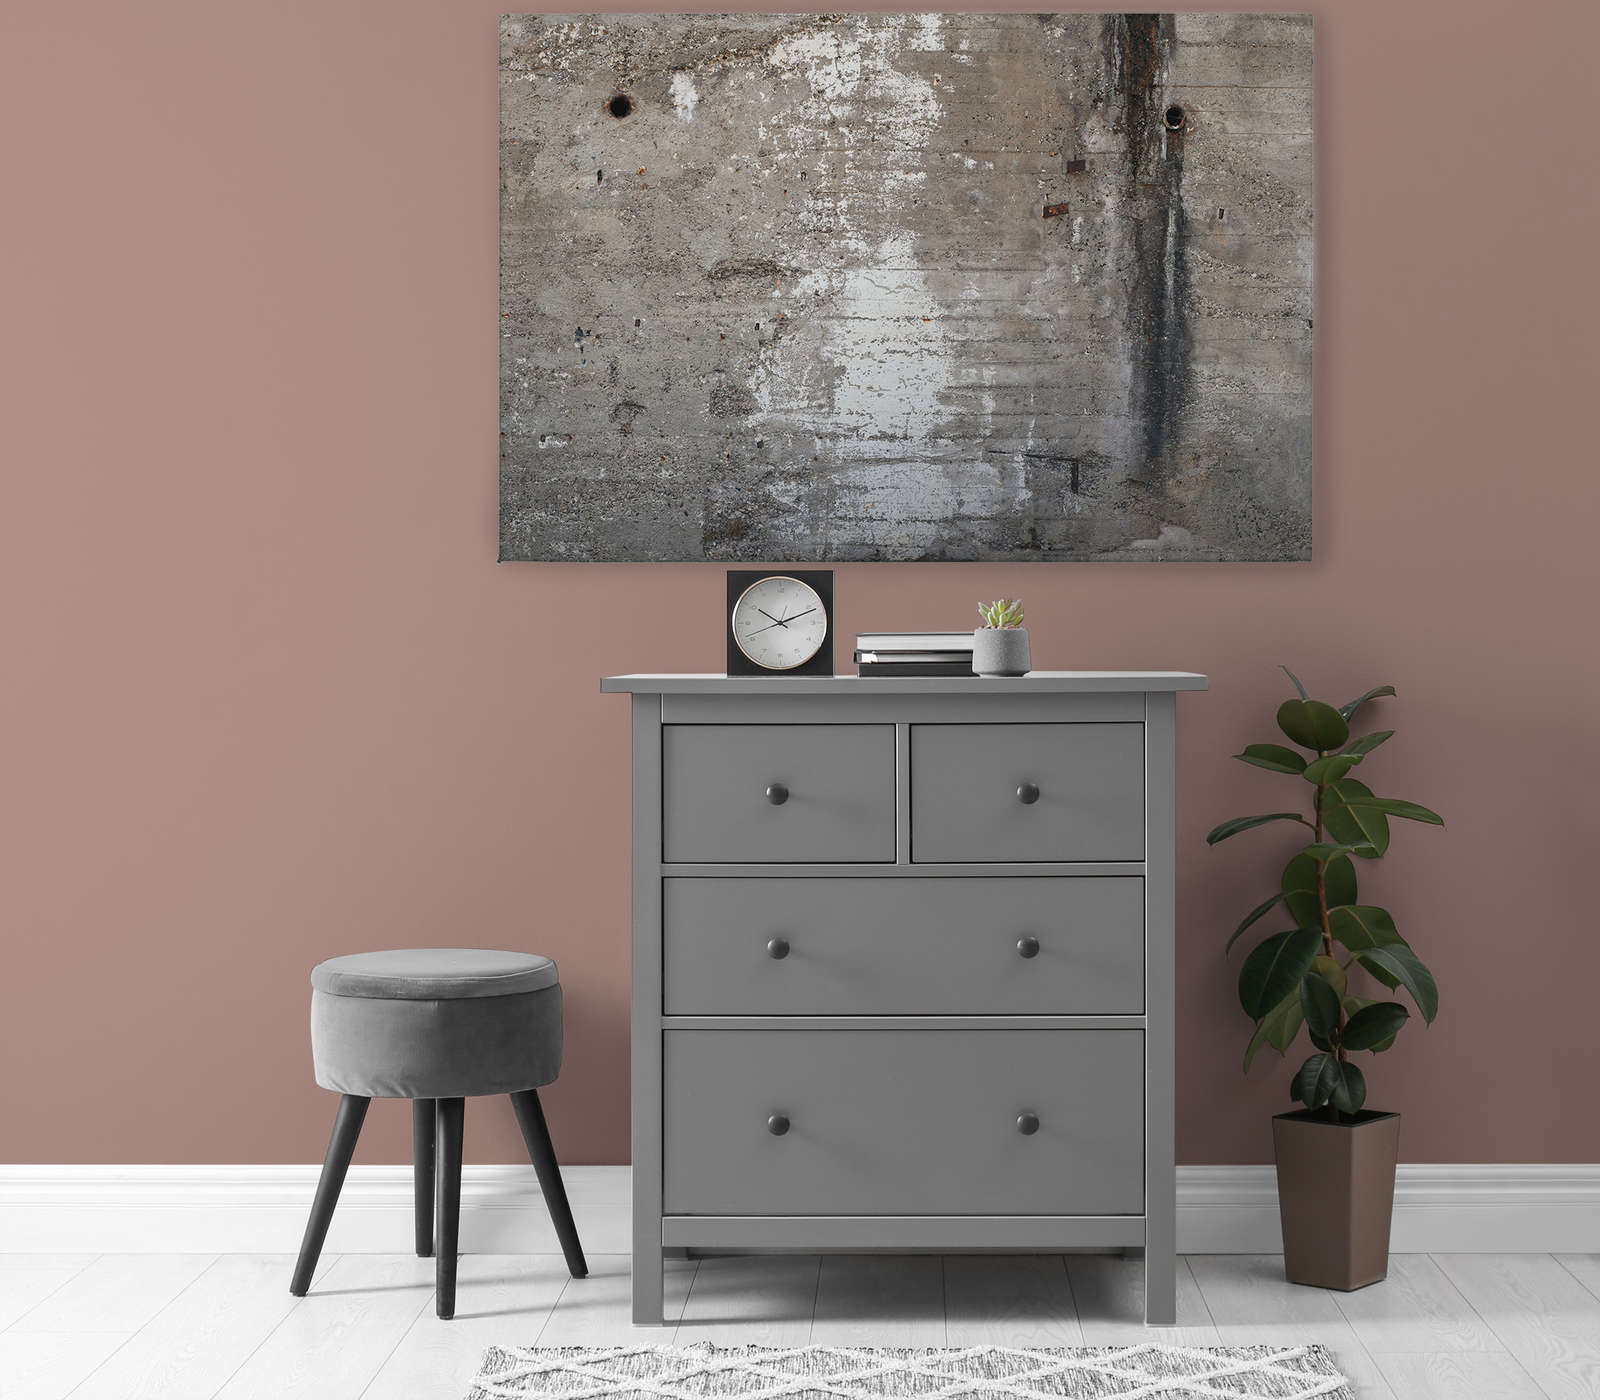             Concrete Wall Canvas Painting Industrial Style Rustic - 1.20 m x 0.80 m
        